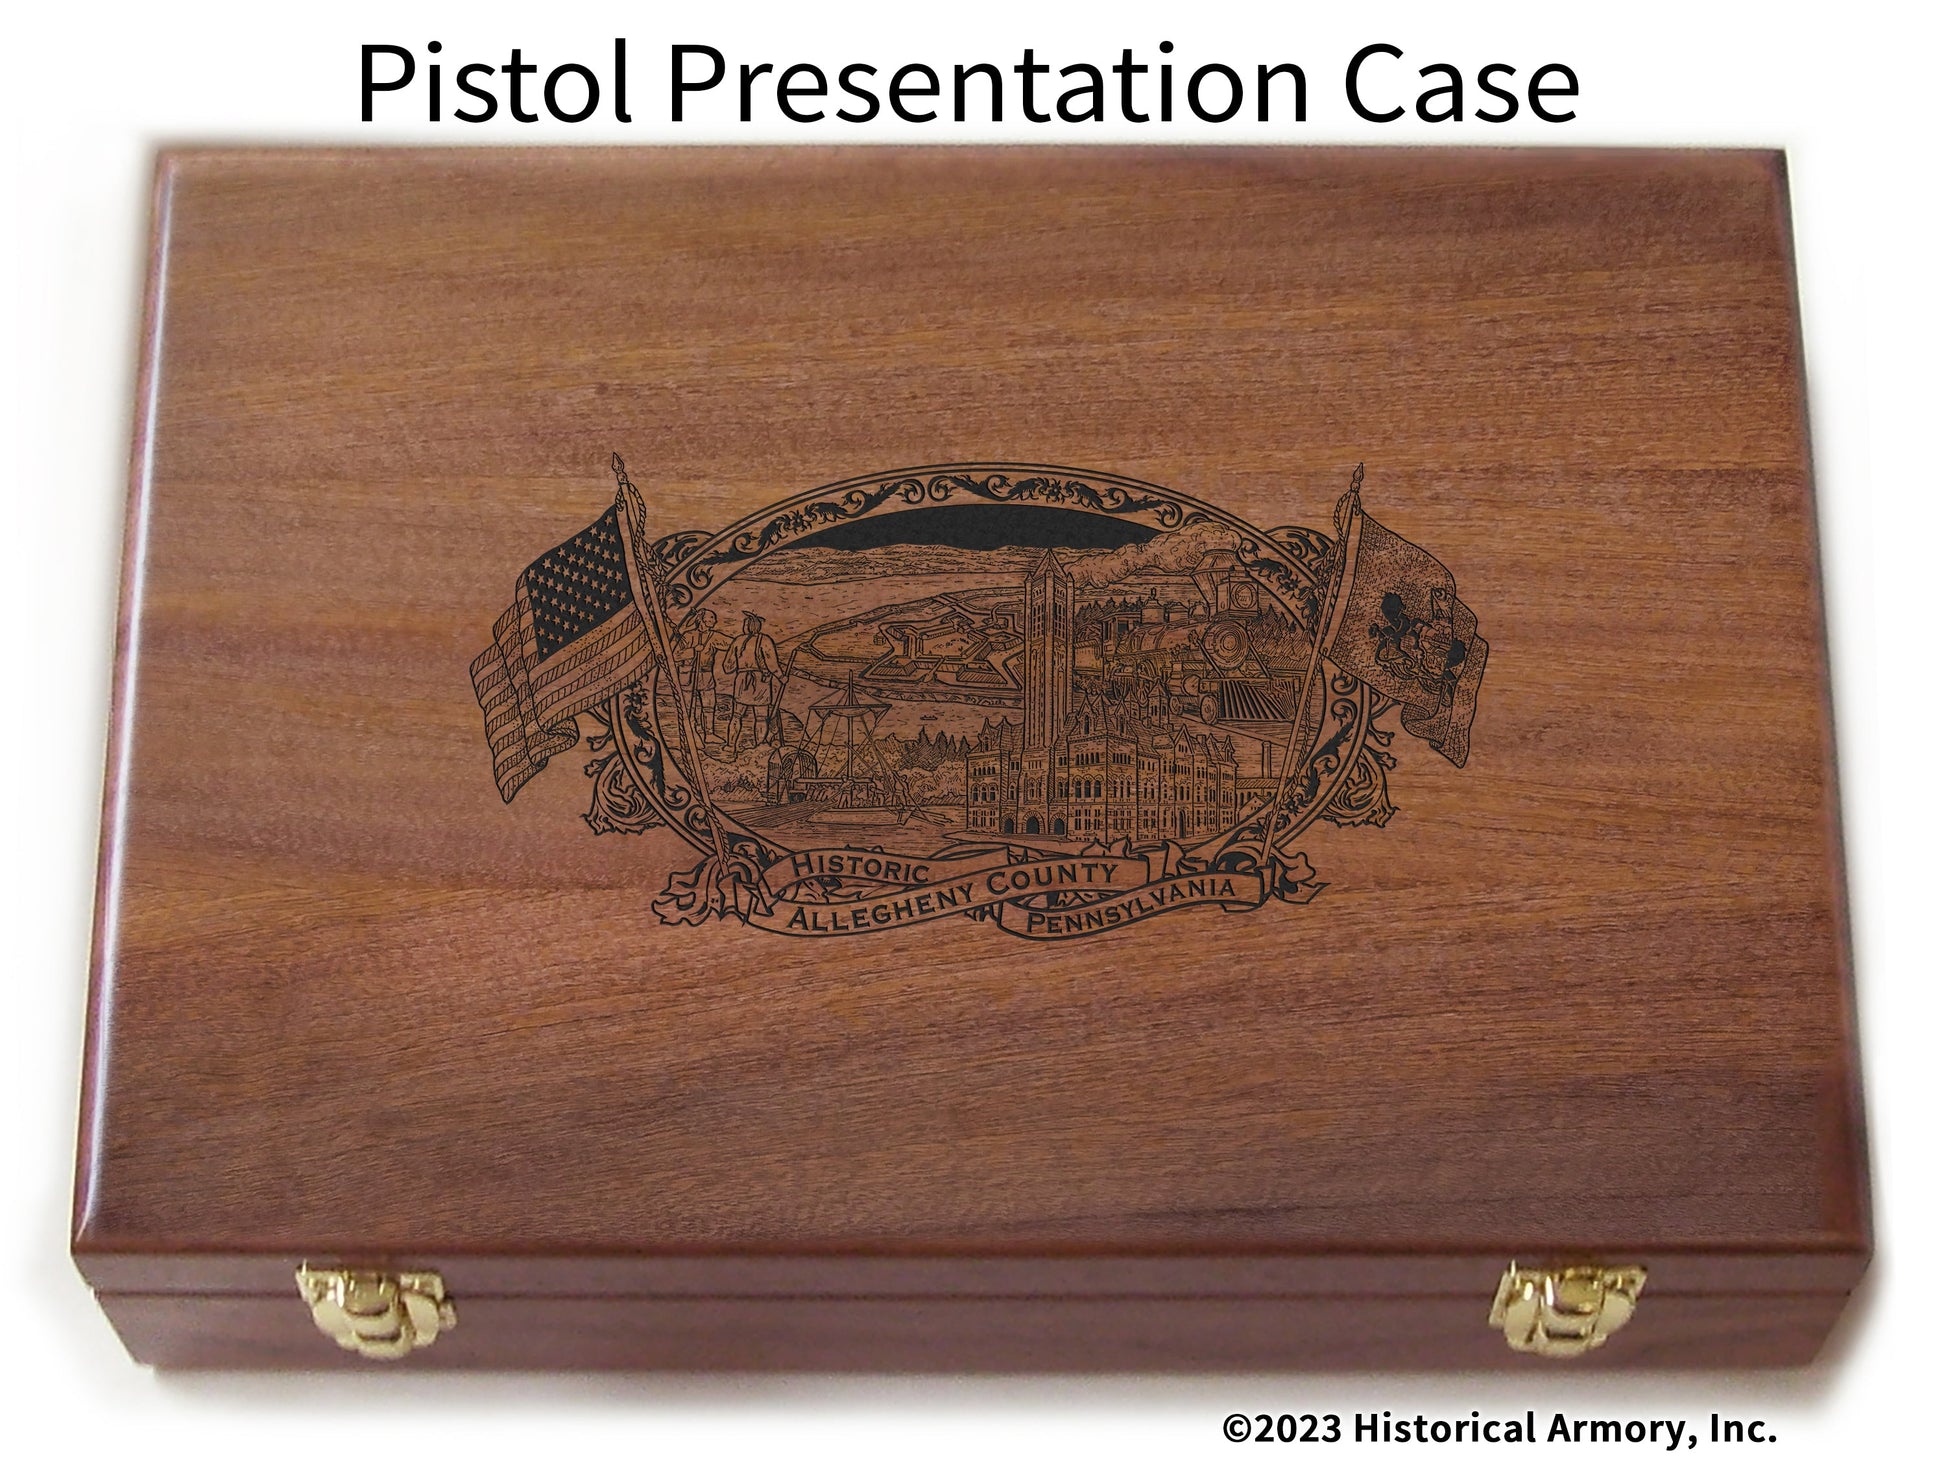 Allegheny County Pennsylvania Engraved .45 Auto Ruger 1911 Presentation Case